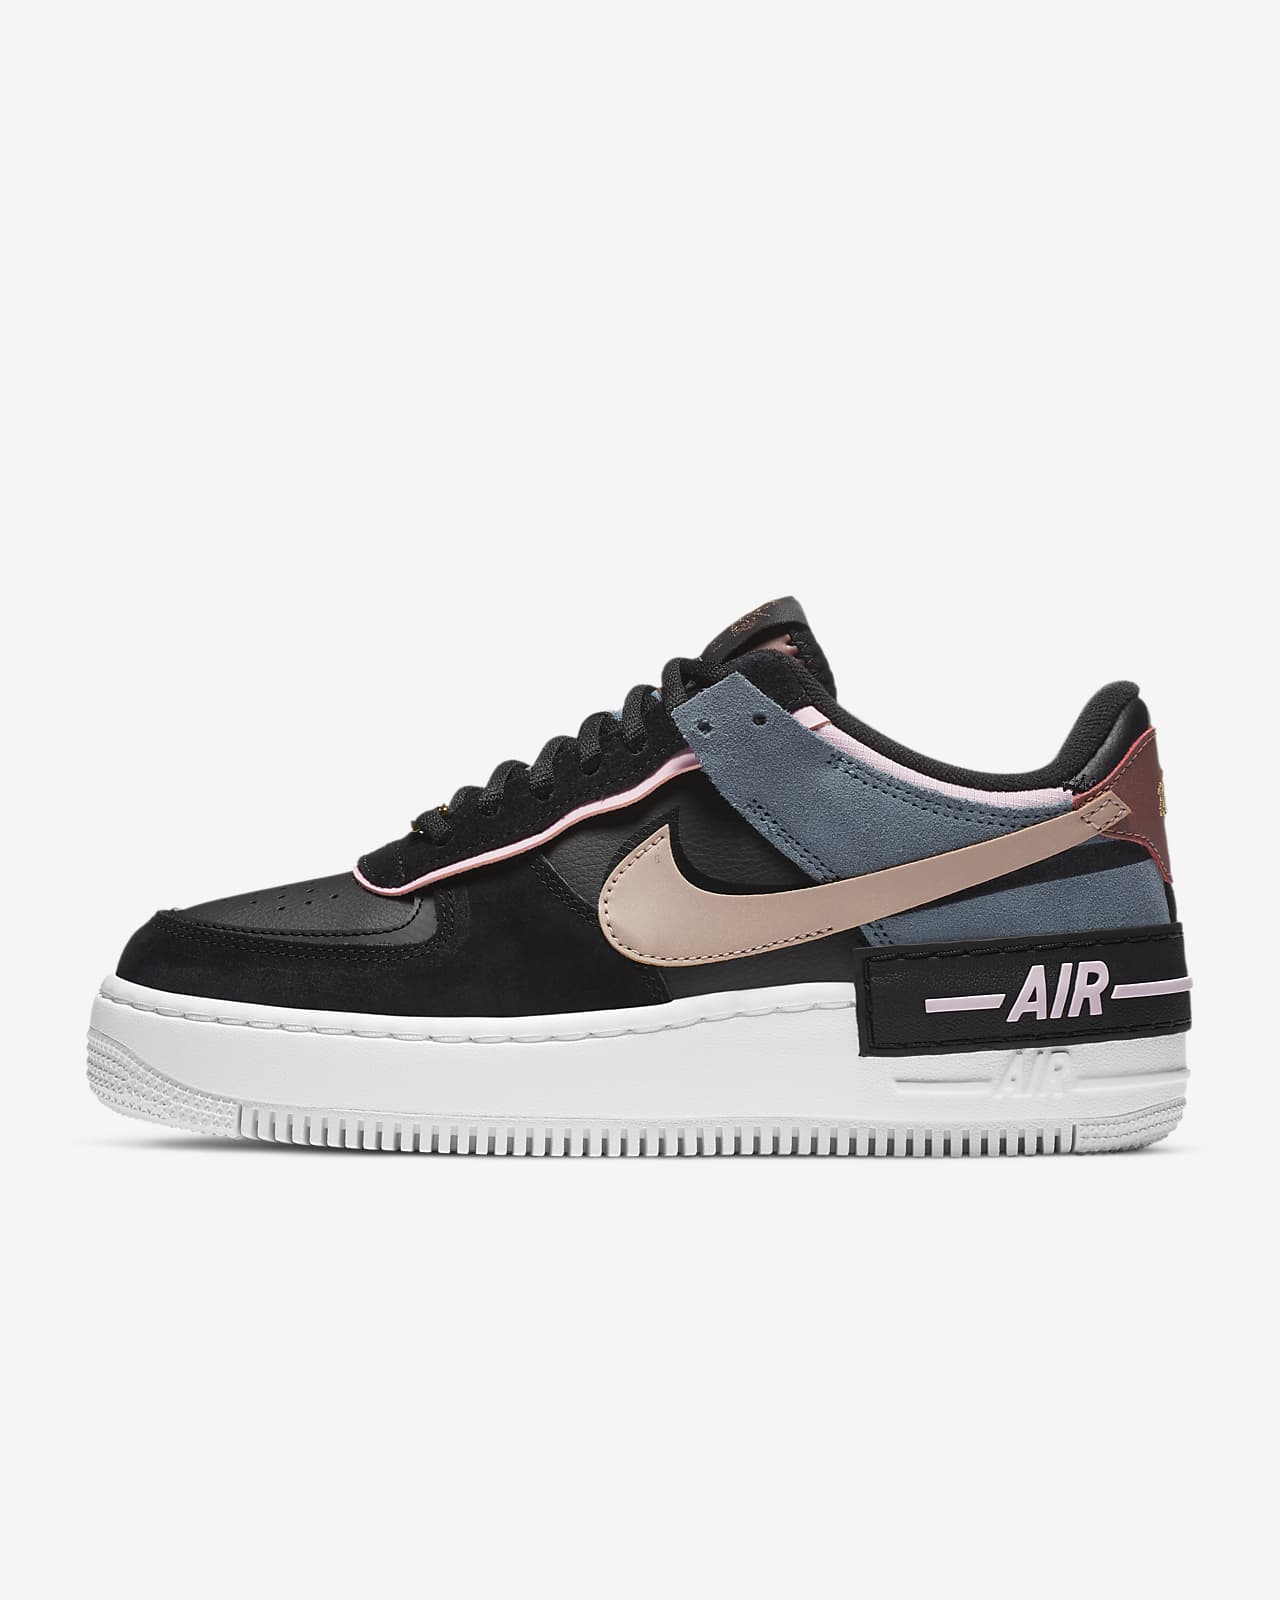 nike air force 1 donna nera